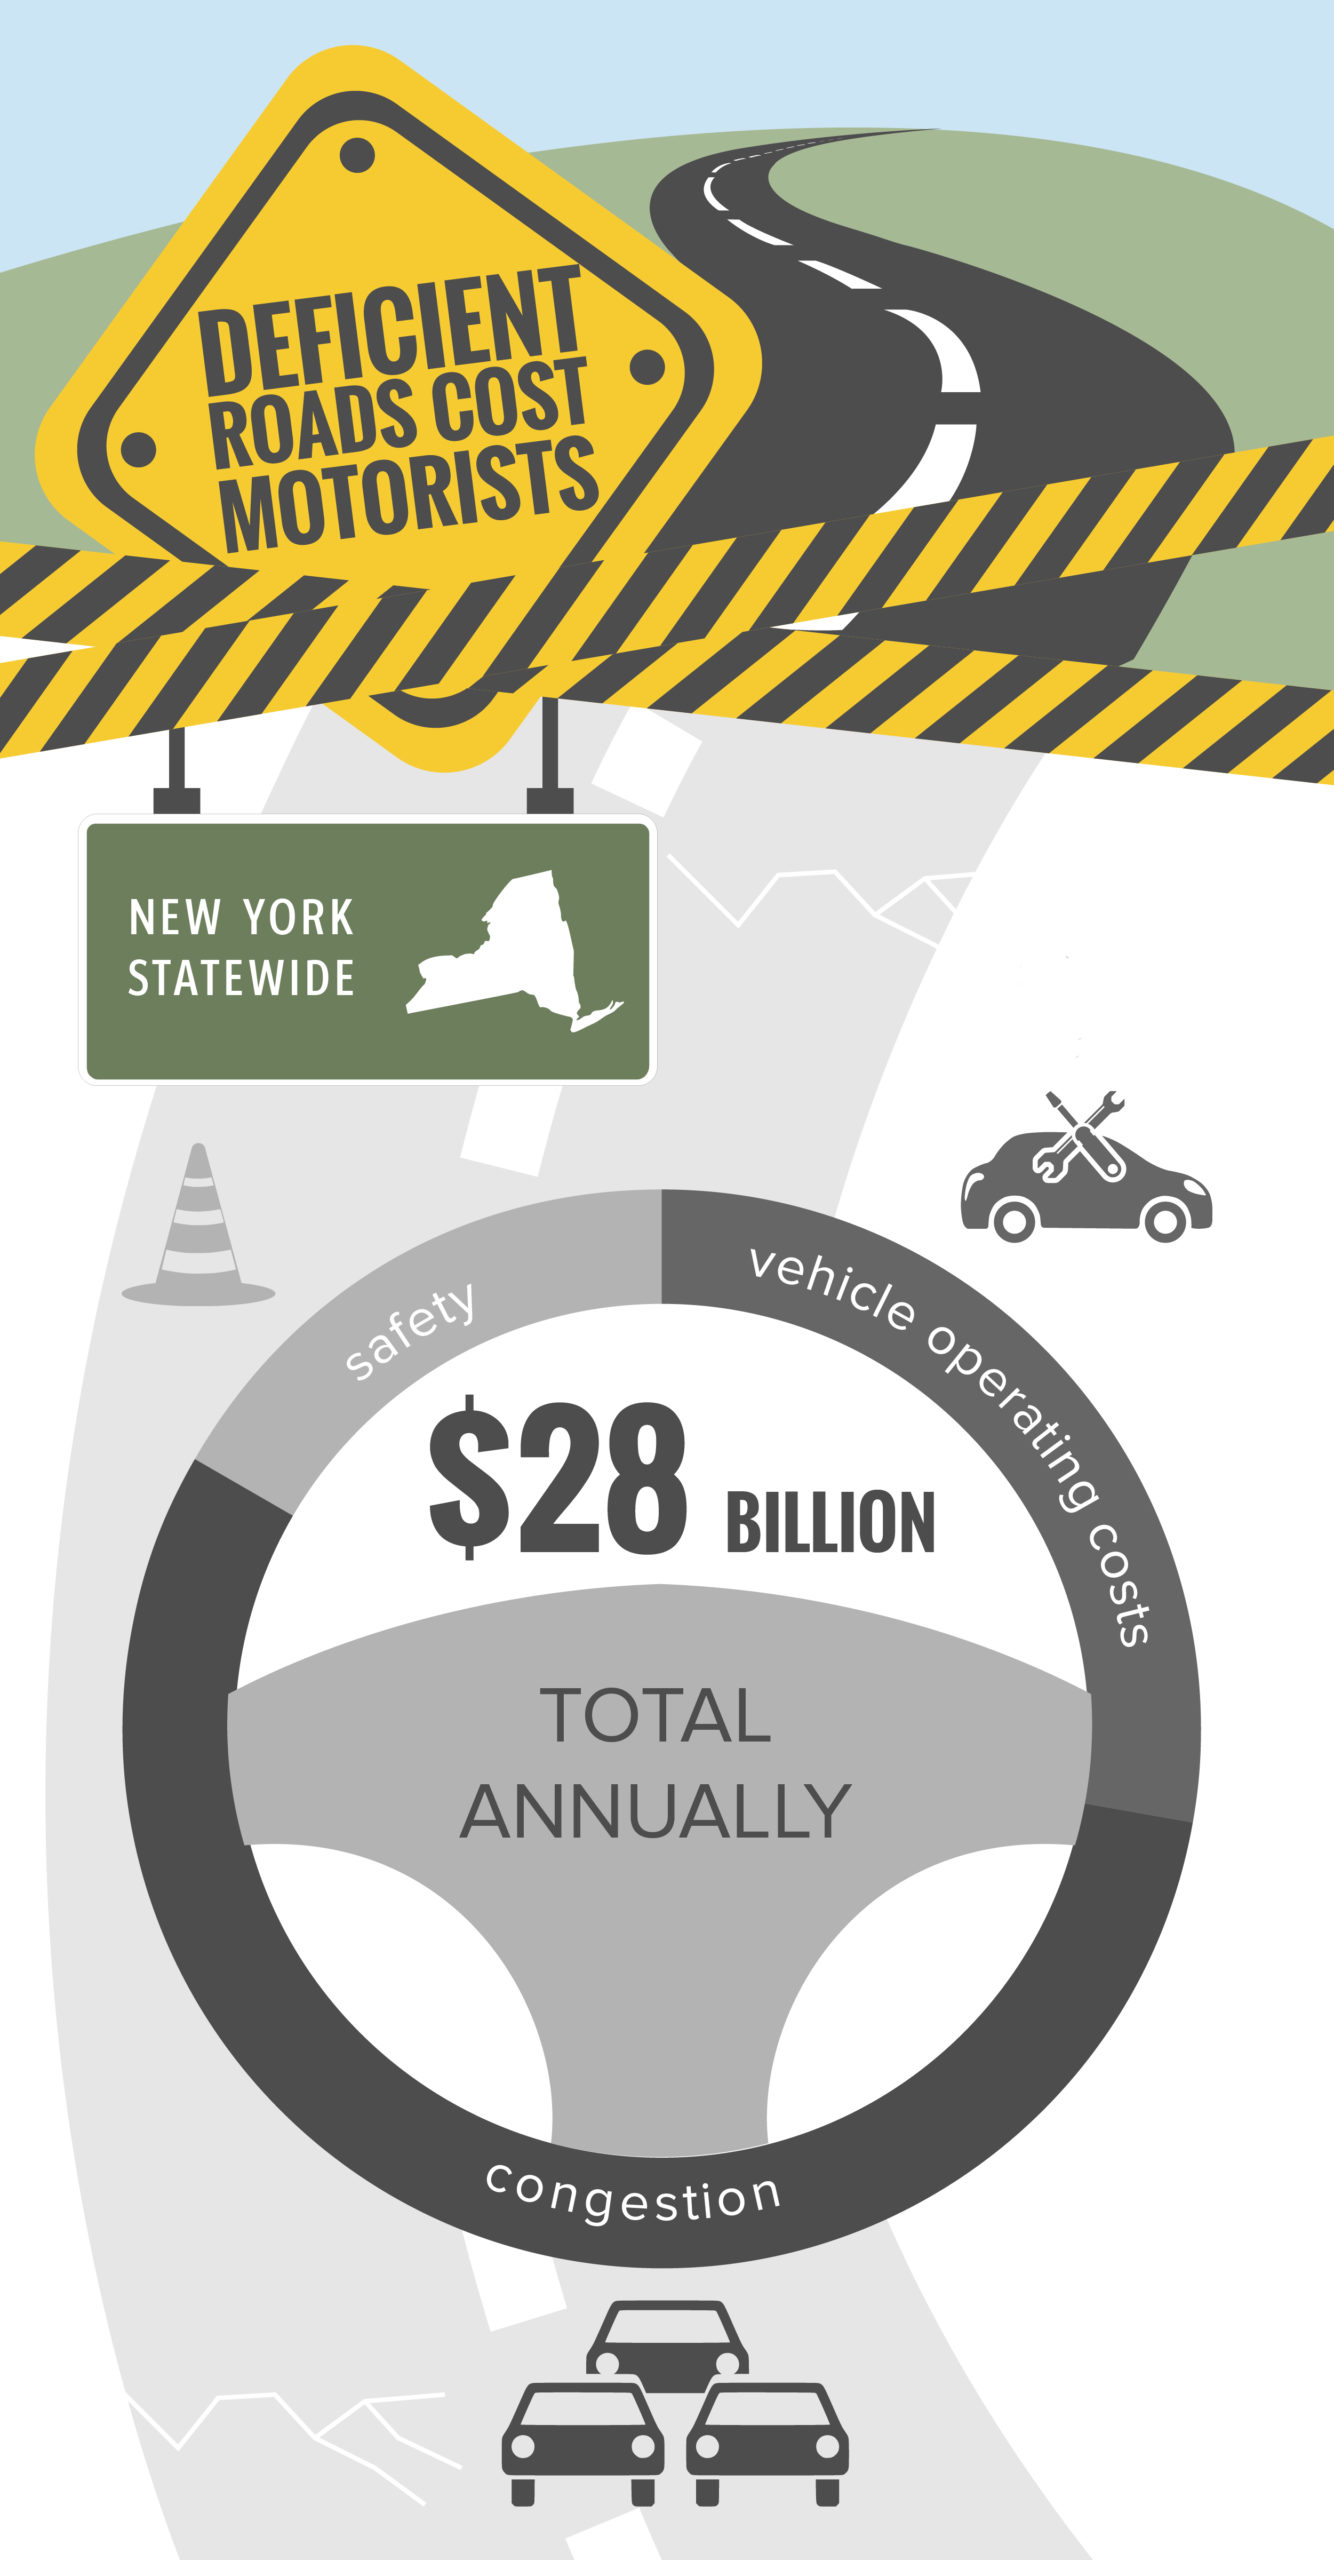 New York Deficient Roads Cost to Motorists Infographic – January 2022